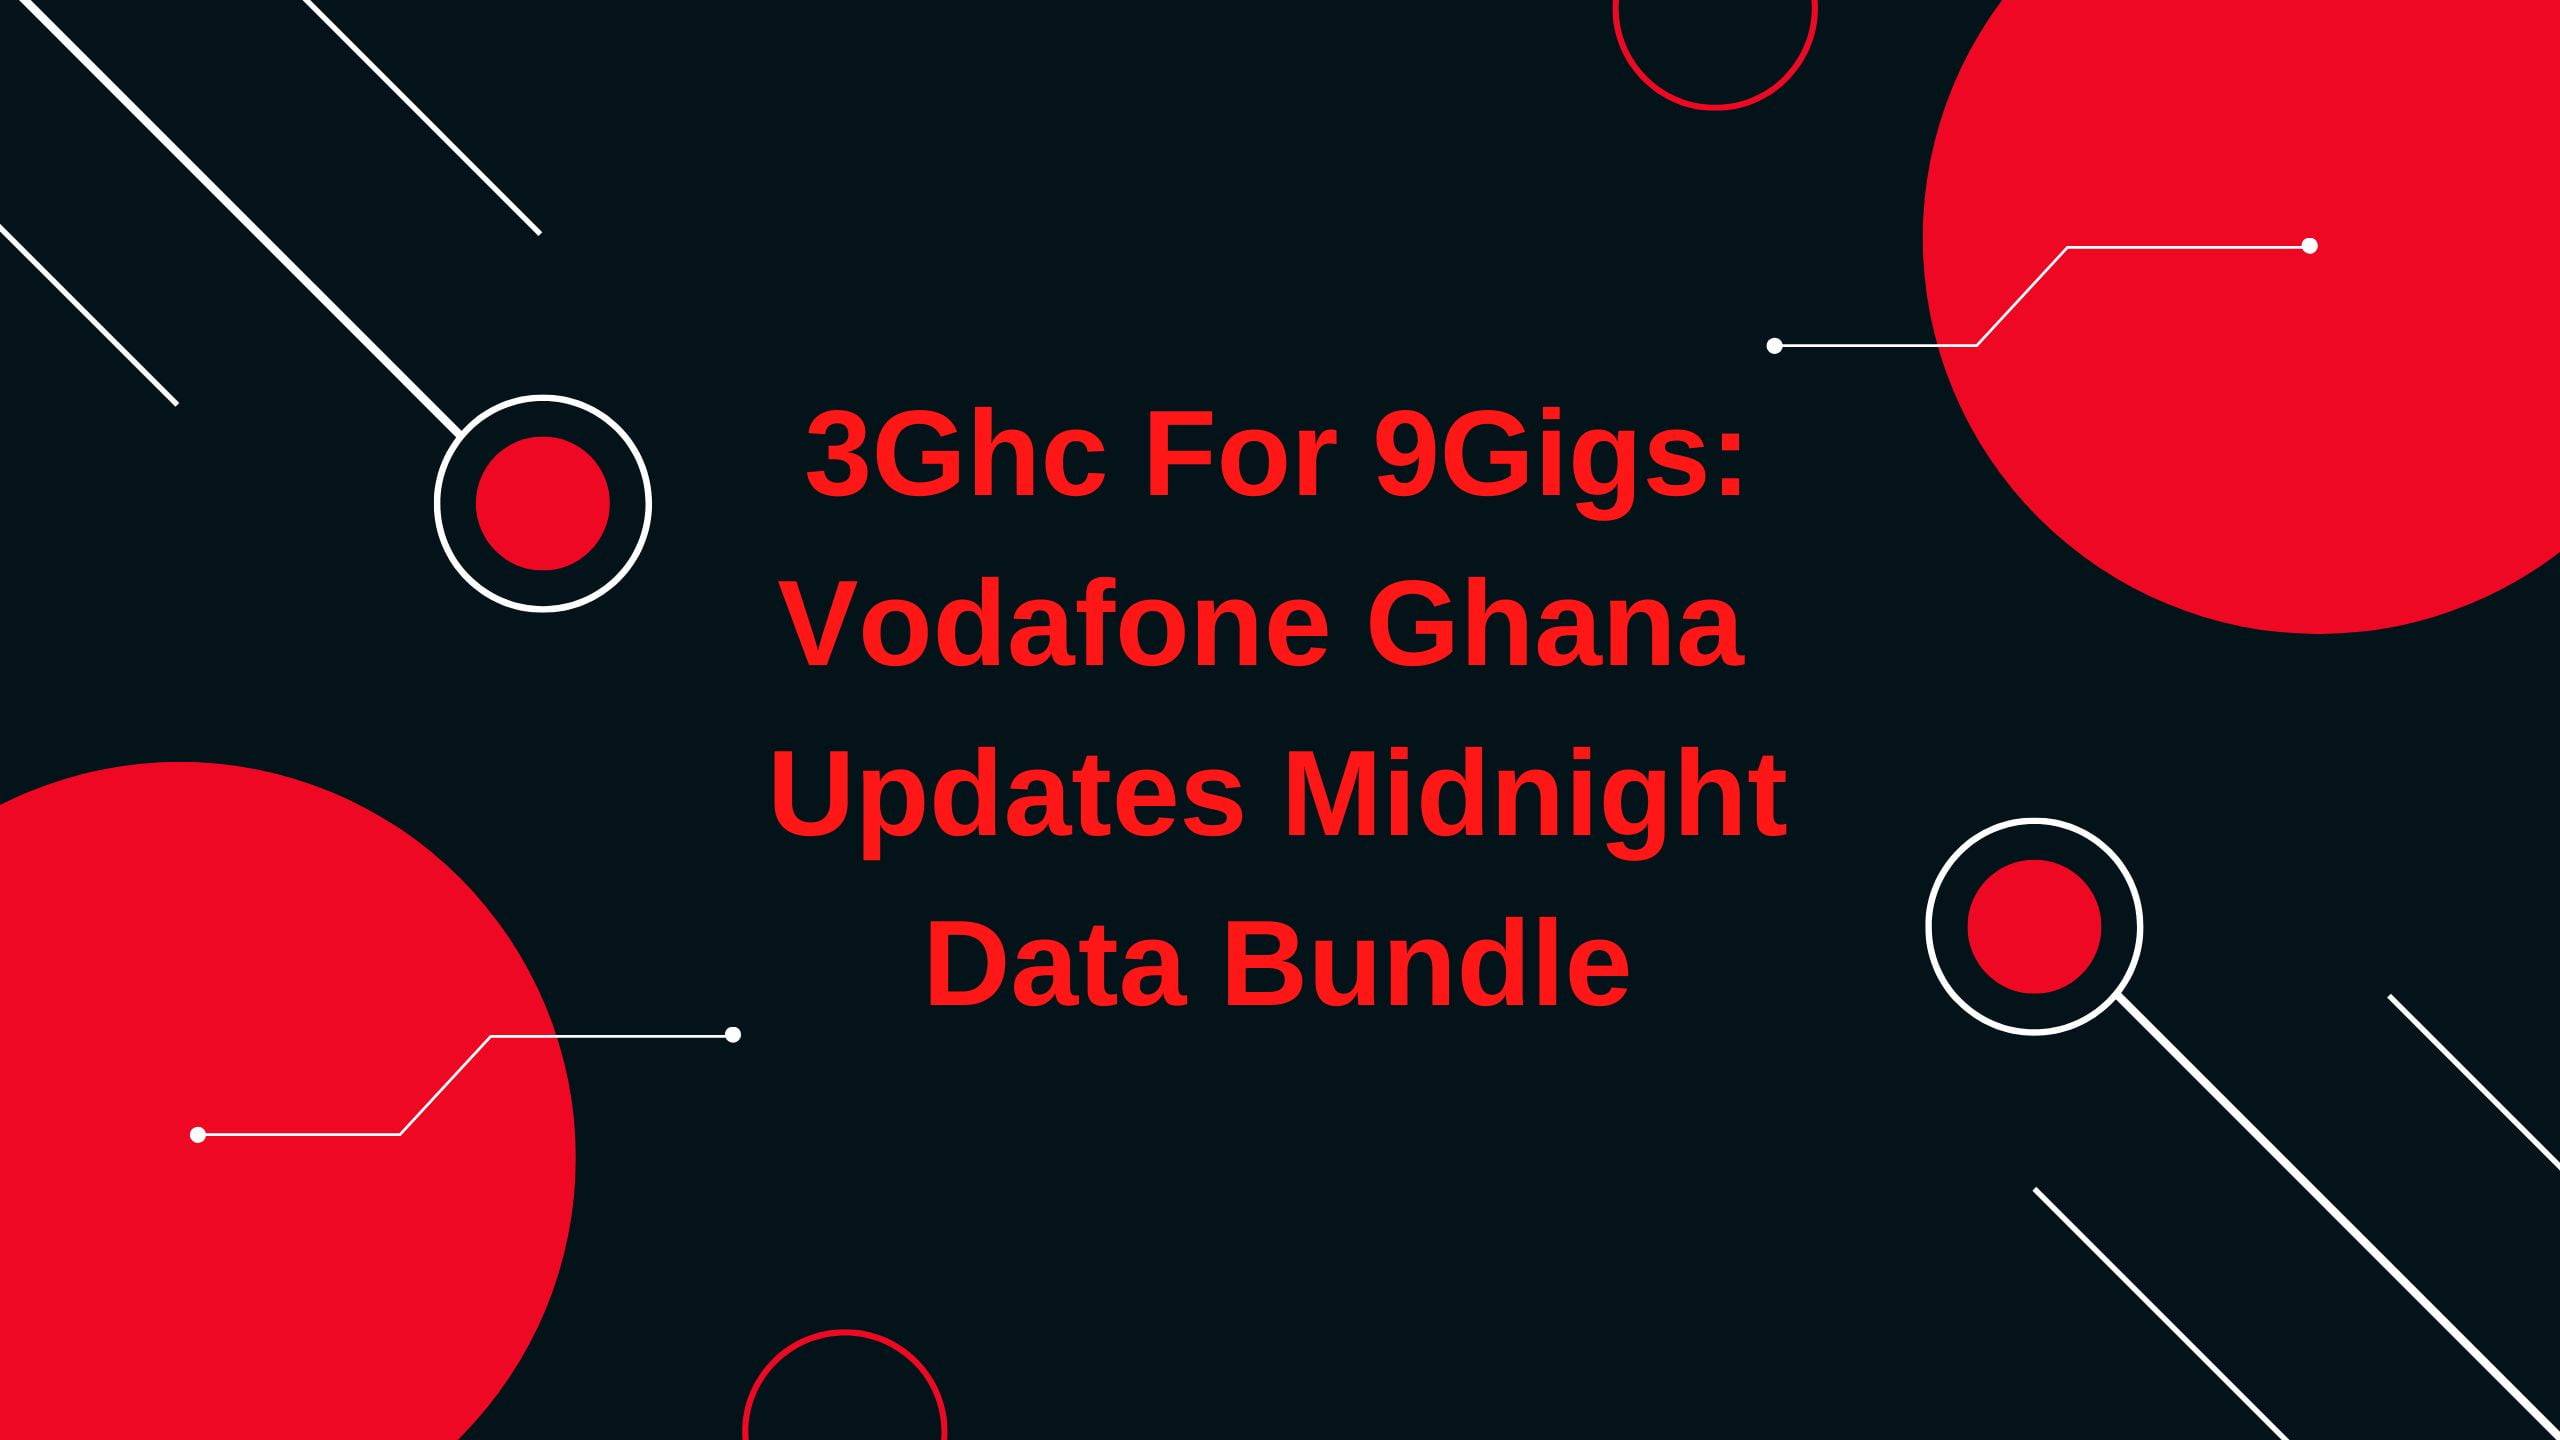 3Ghc For 9Gigs: Vodafone Ghana Updates Midnight Data Bundle 1 » Tech And Scholarship Updates